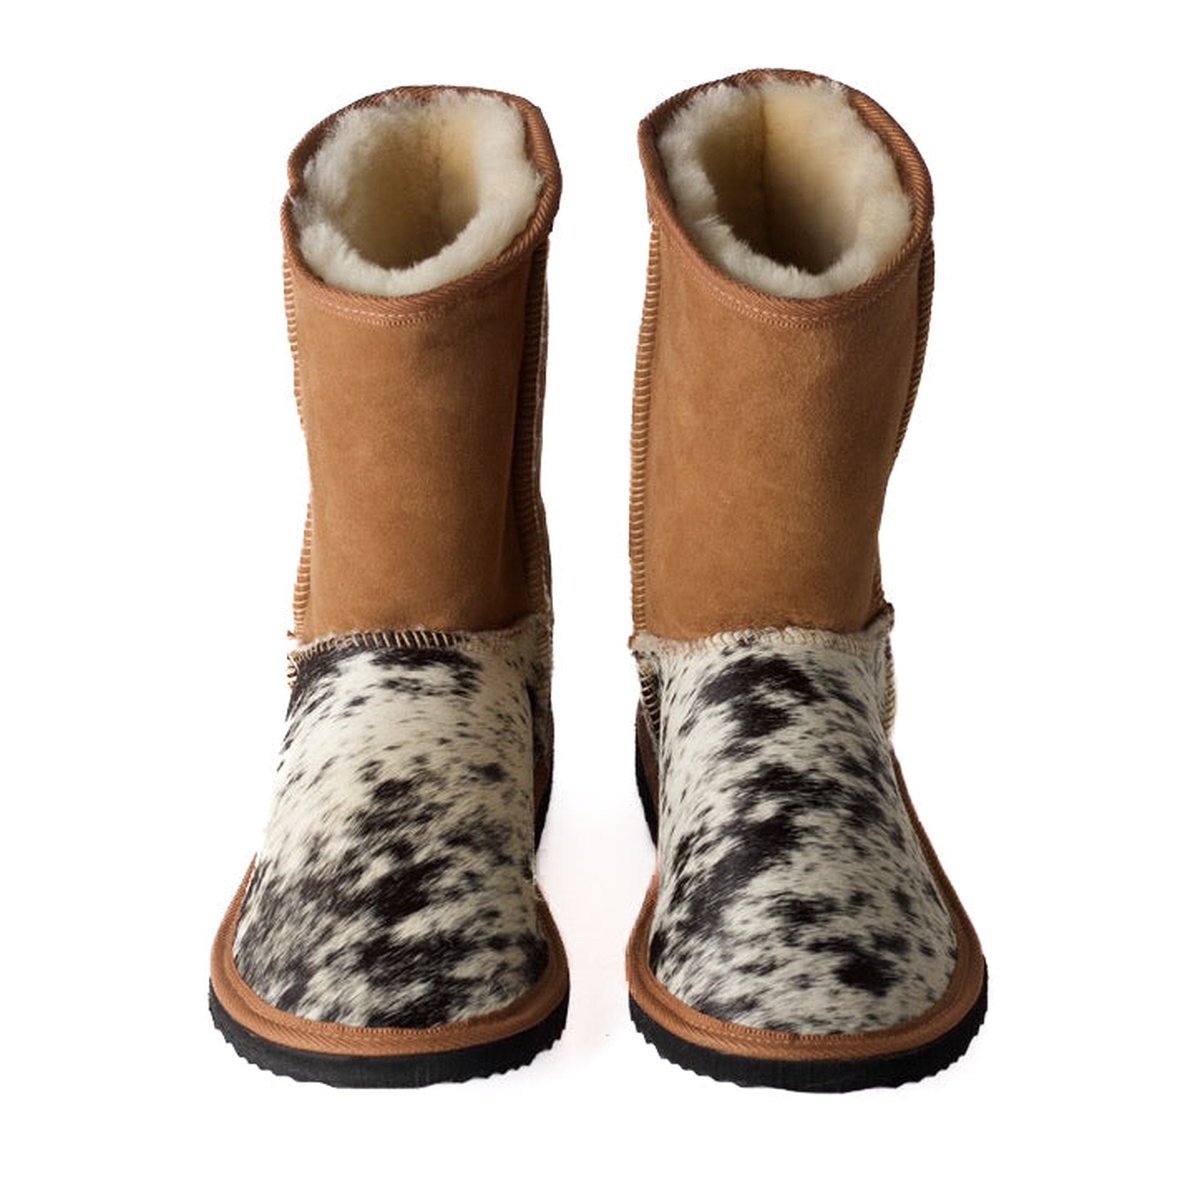 3/4 Classic Ugg Boot - Rawhide Black and White